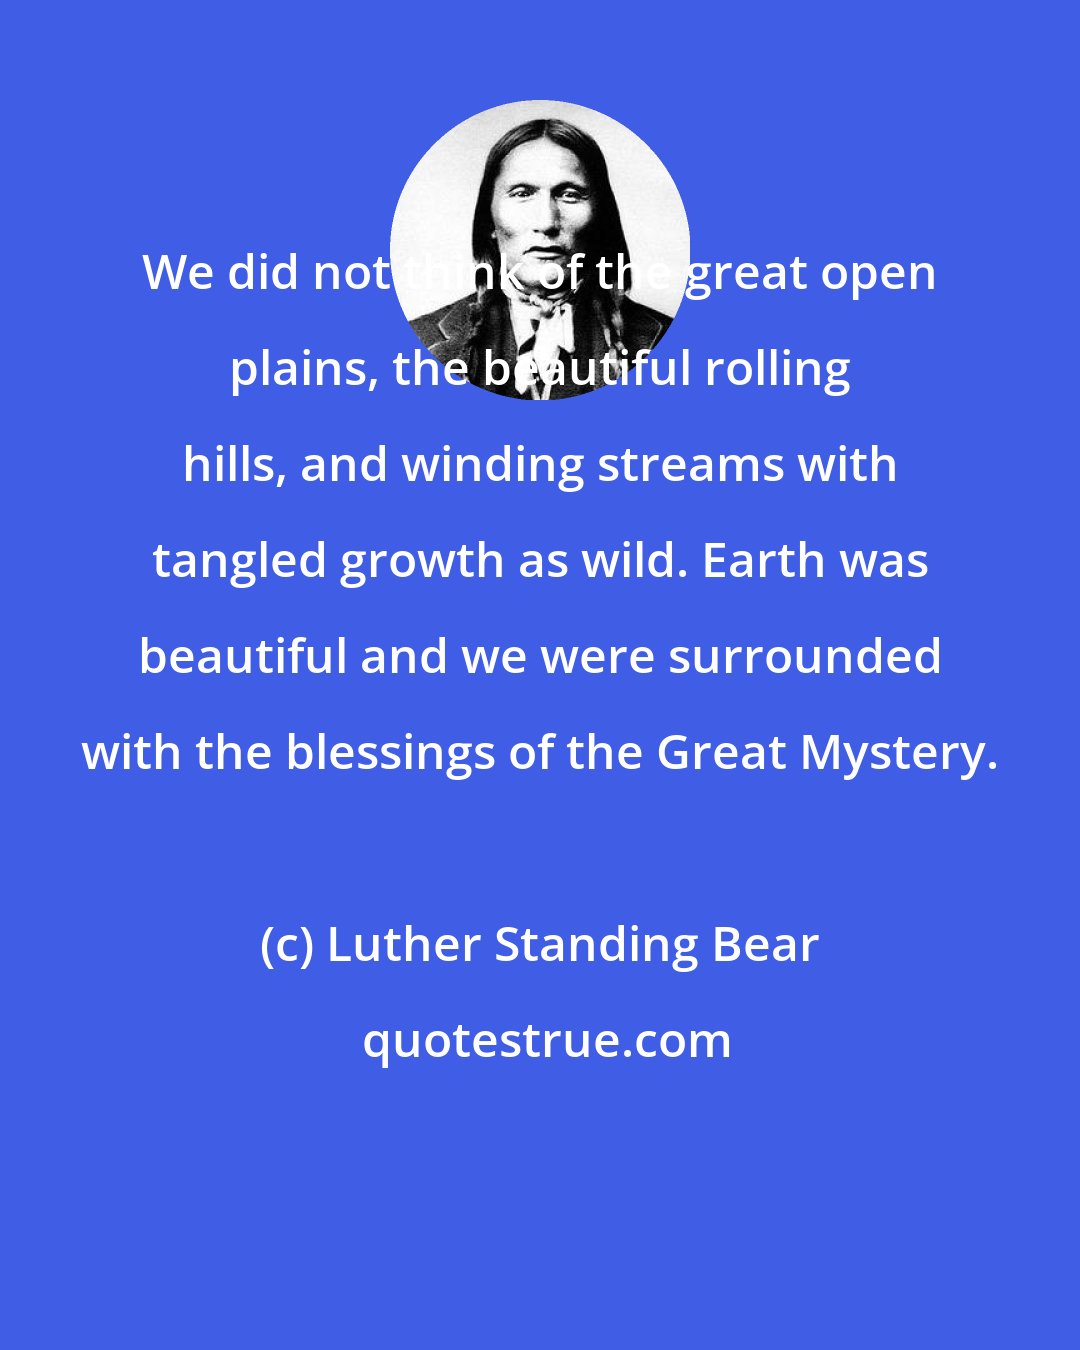 Luther Standing Bear: We did not think of the great open plains, the beautiful rolling hills, and winding streams with tangled growth as wild. Earth was beautiful and we were surrounded with the blessings of the Great Mystery.